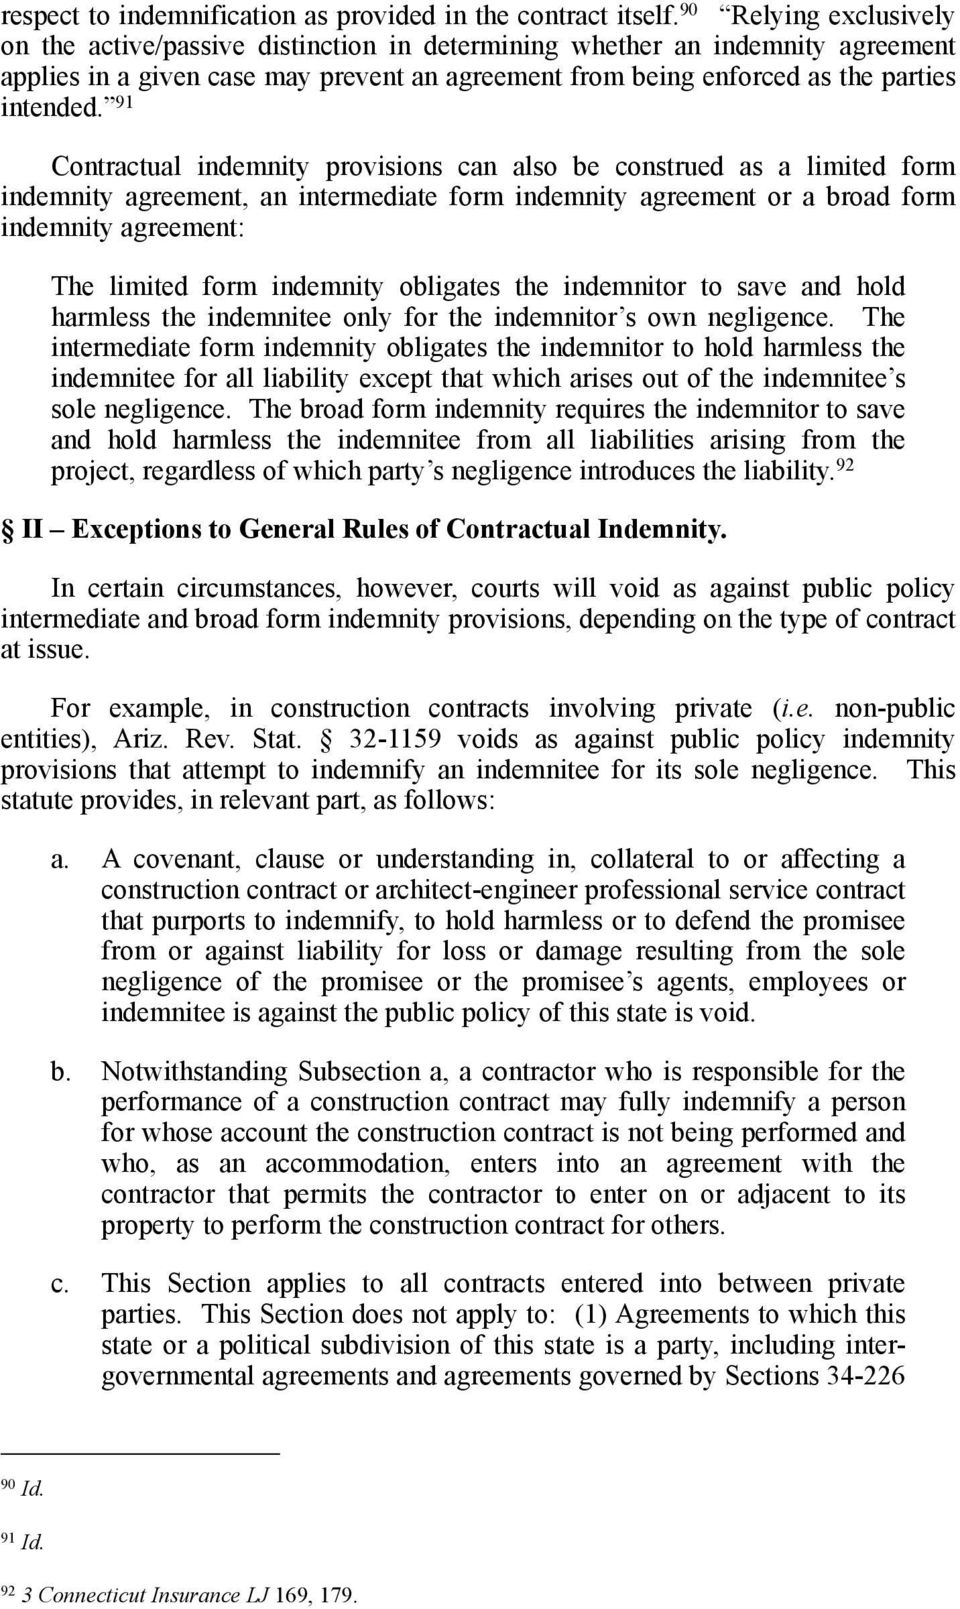 Construction Indemnity Agreement Agreements To Indemnify General Liability Insurance Pdf